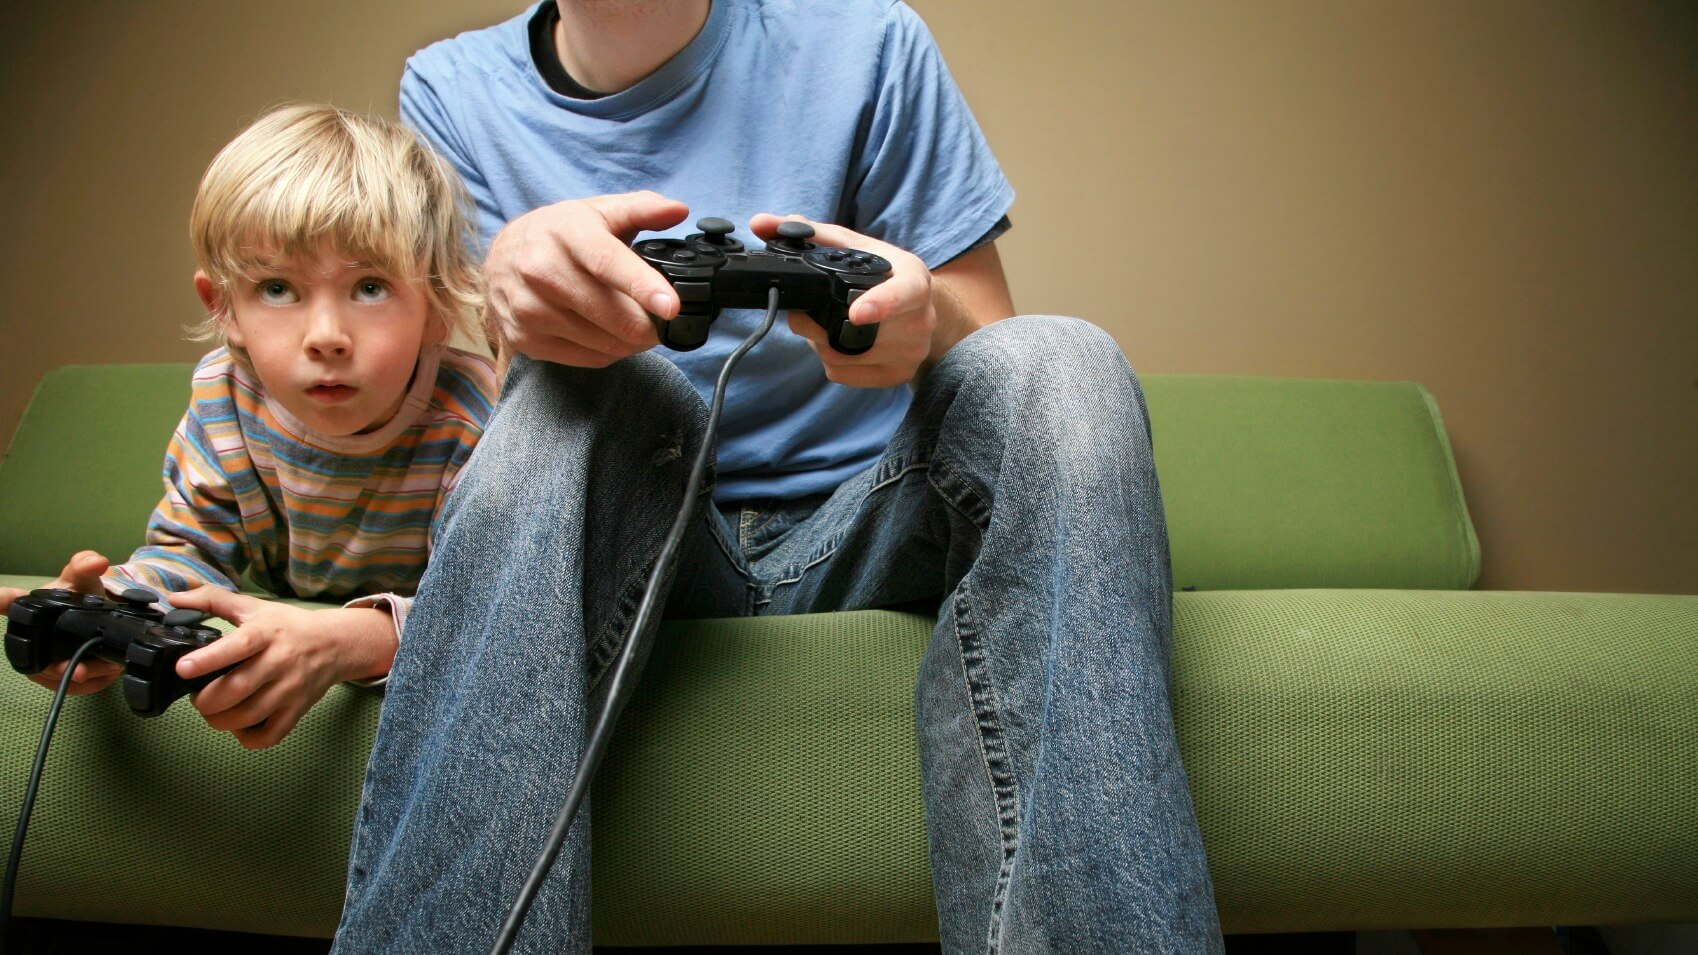 Everything Bad Is Good For You: How One Company Is Using Video Games to Treat ADHD